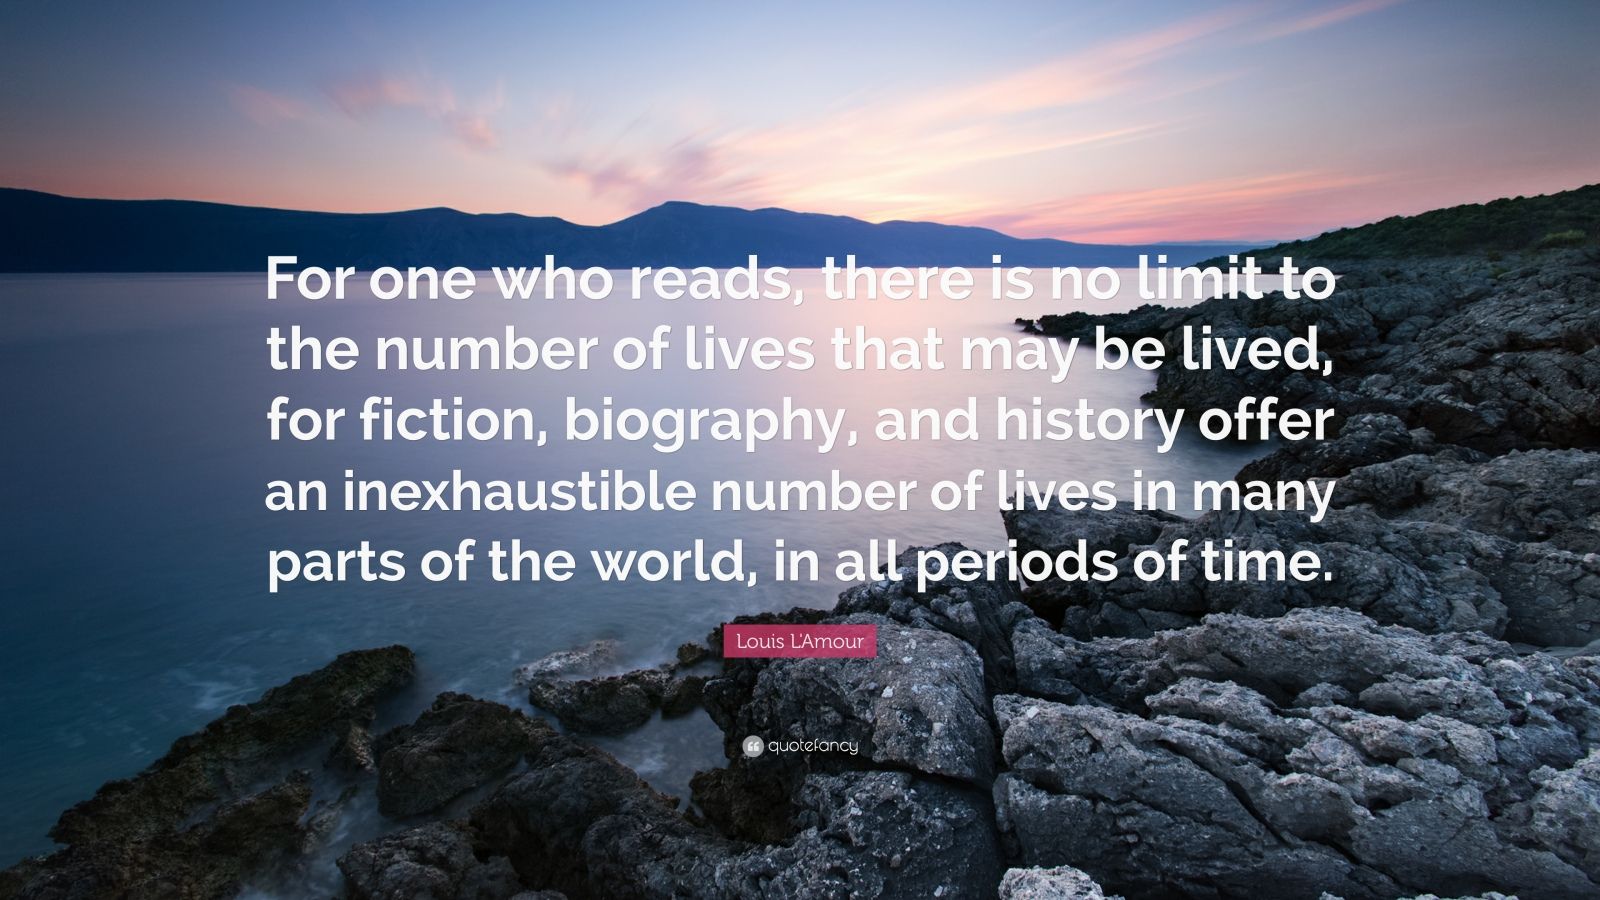 Louis L&#39;Amour Quote: “For one who reads, there is no limit to the number of lives that may be ...